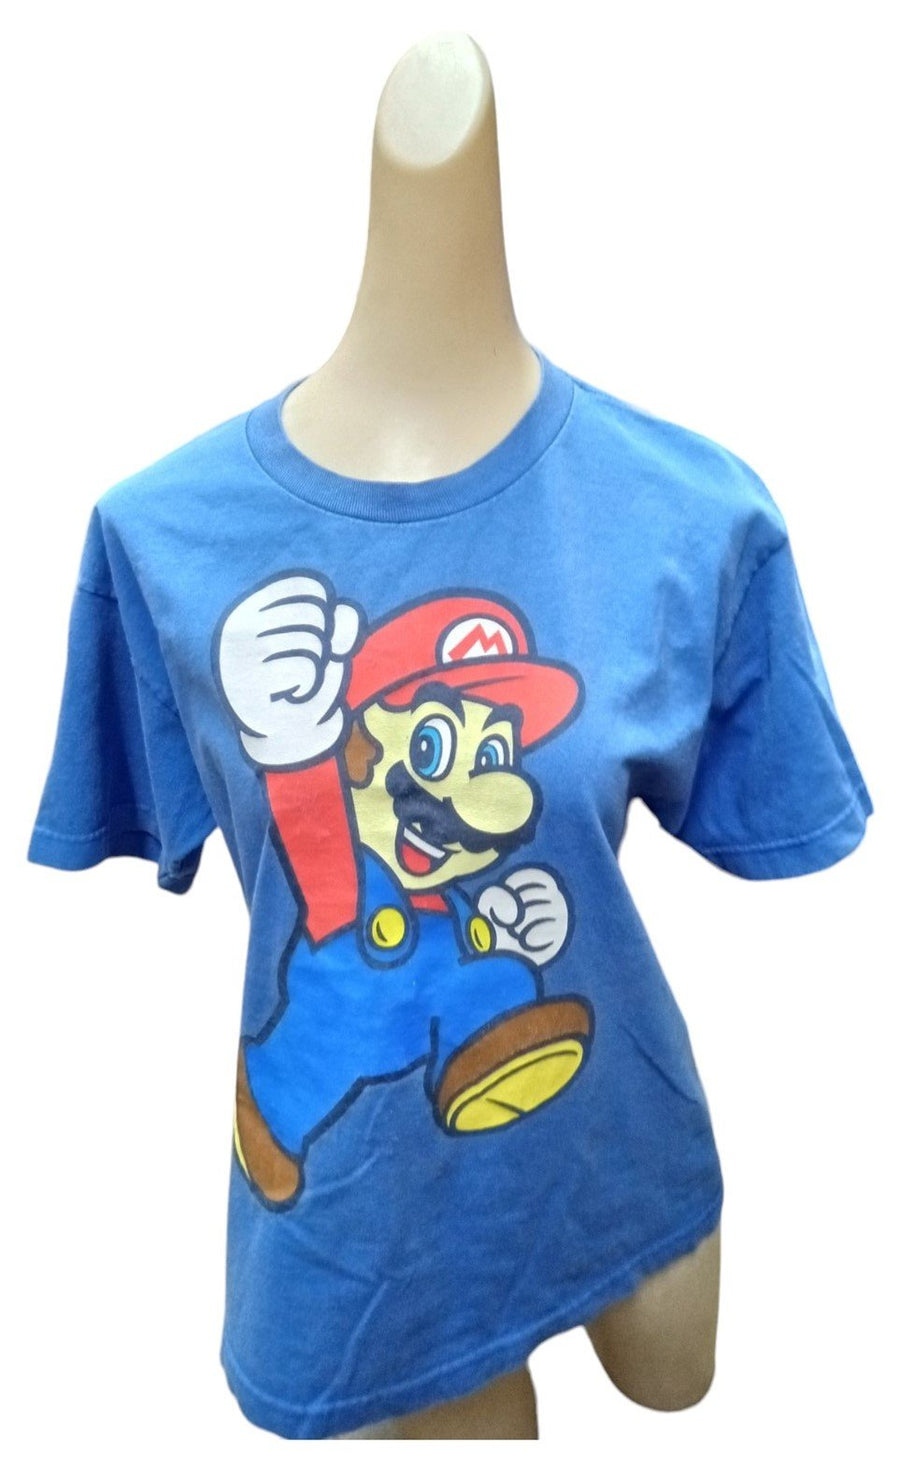 Super Mario Graphic T-Shirt Collectible Clothing Nintendo Gaming Merchandise